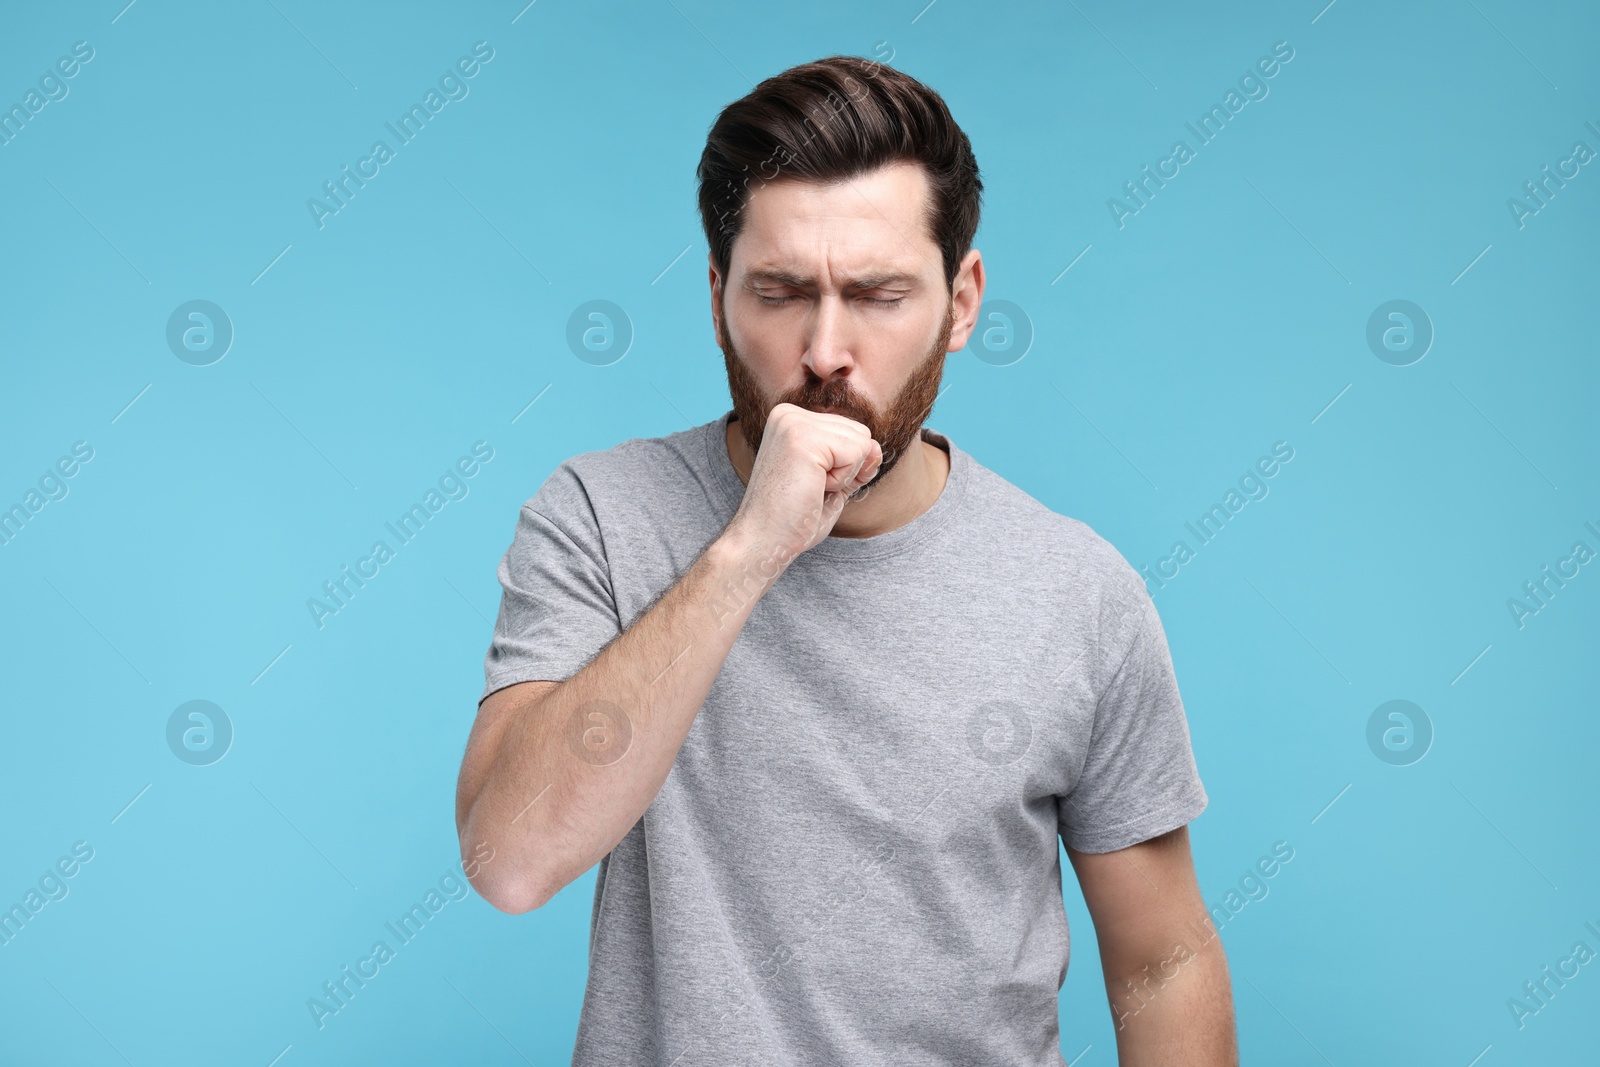 Photo of Sick man coughing on light blue background. Cold symptoms